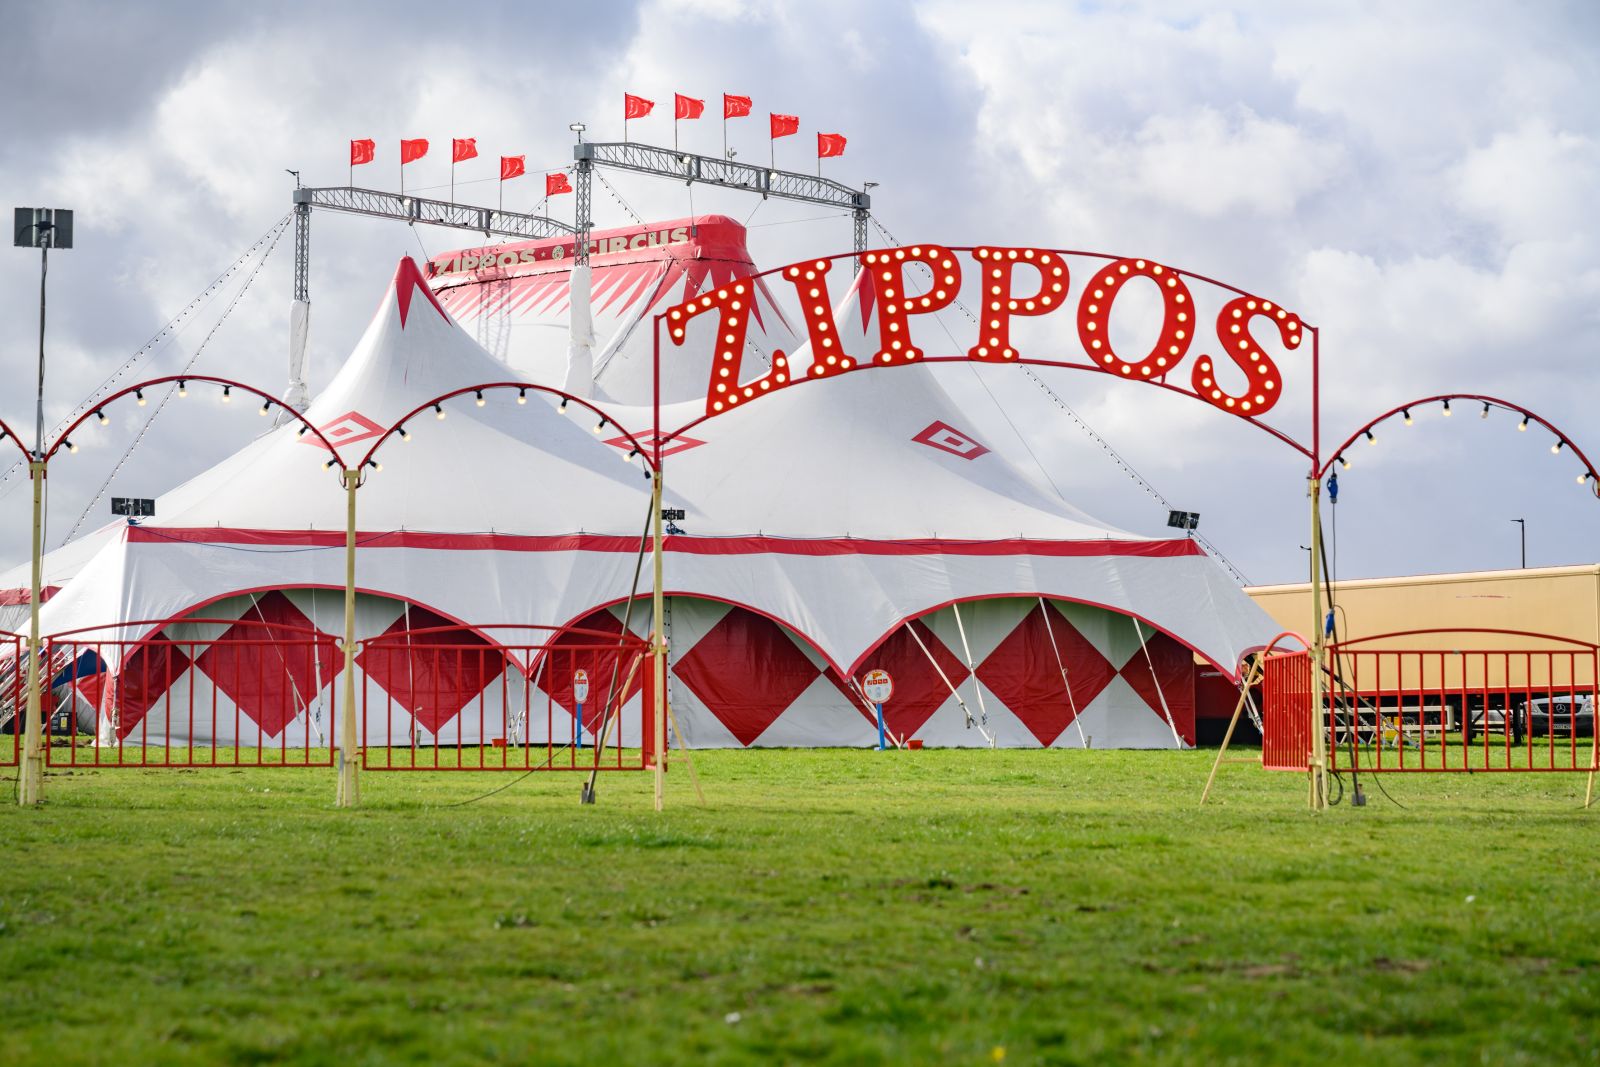 7-facts-you-must-know-about-zippos-circus